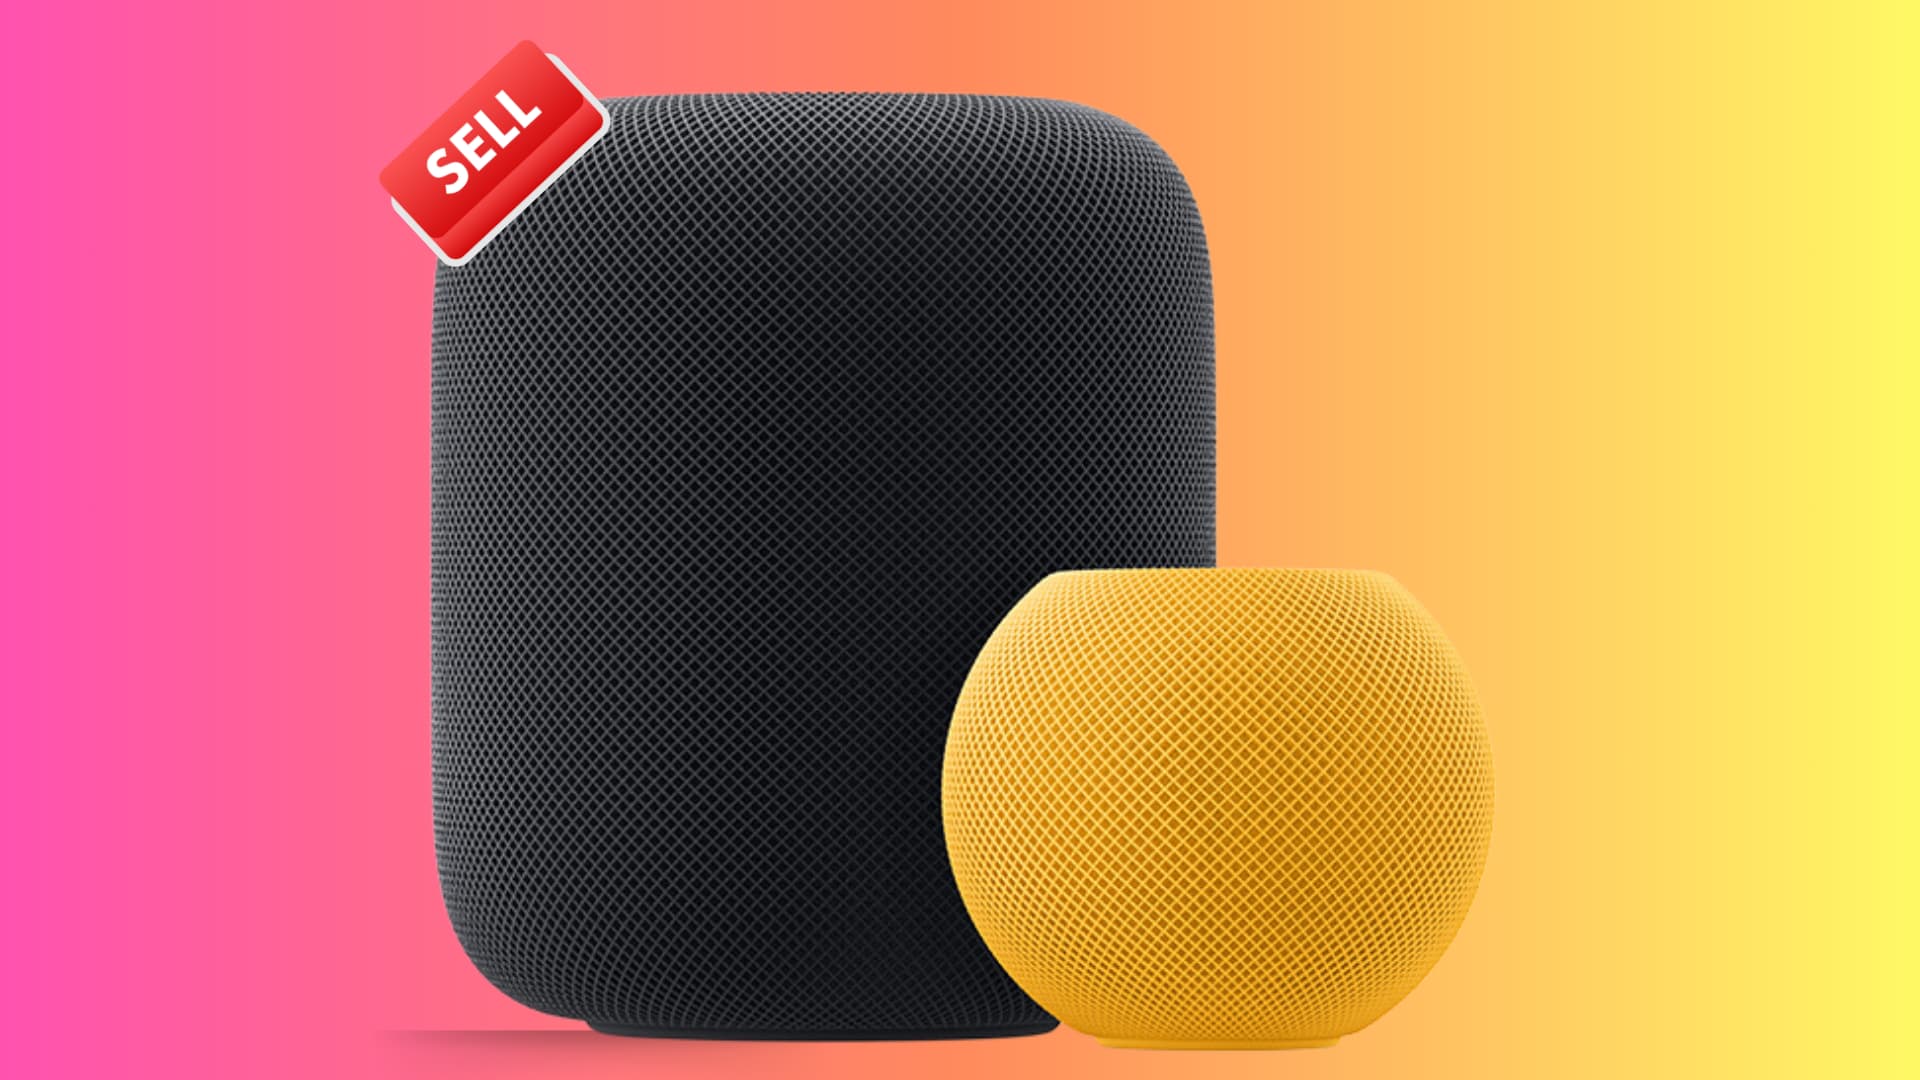 What to do before selling or giving away your HomePod